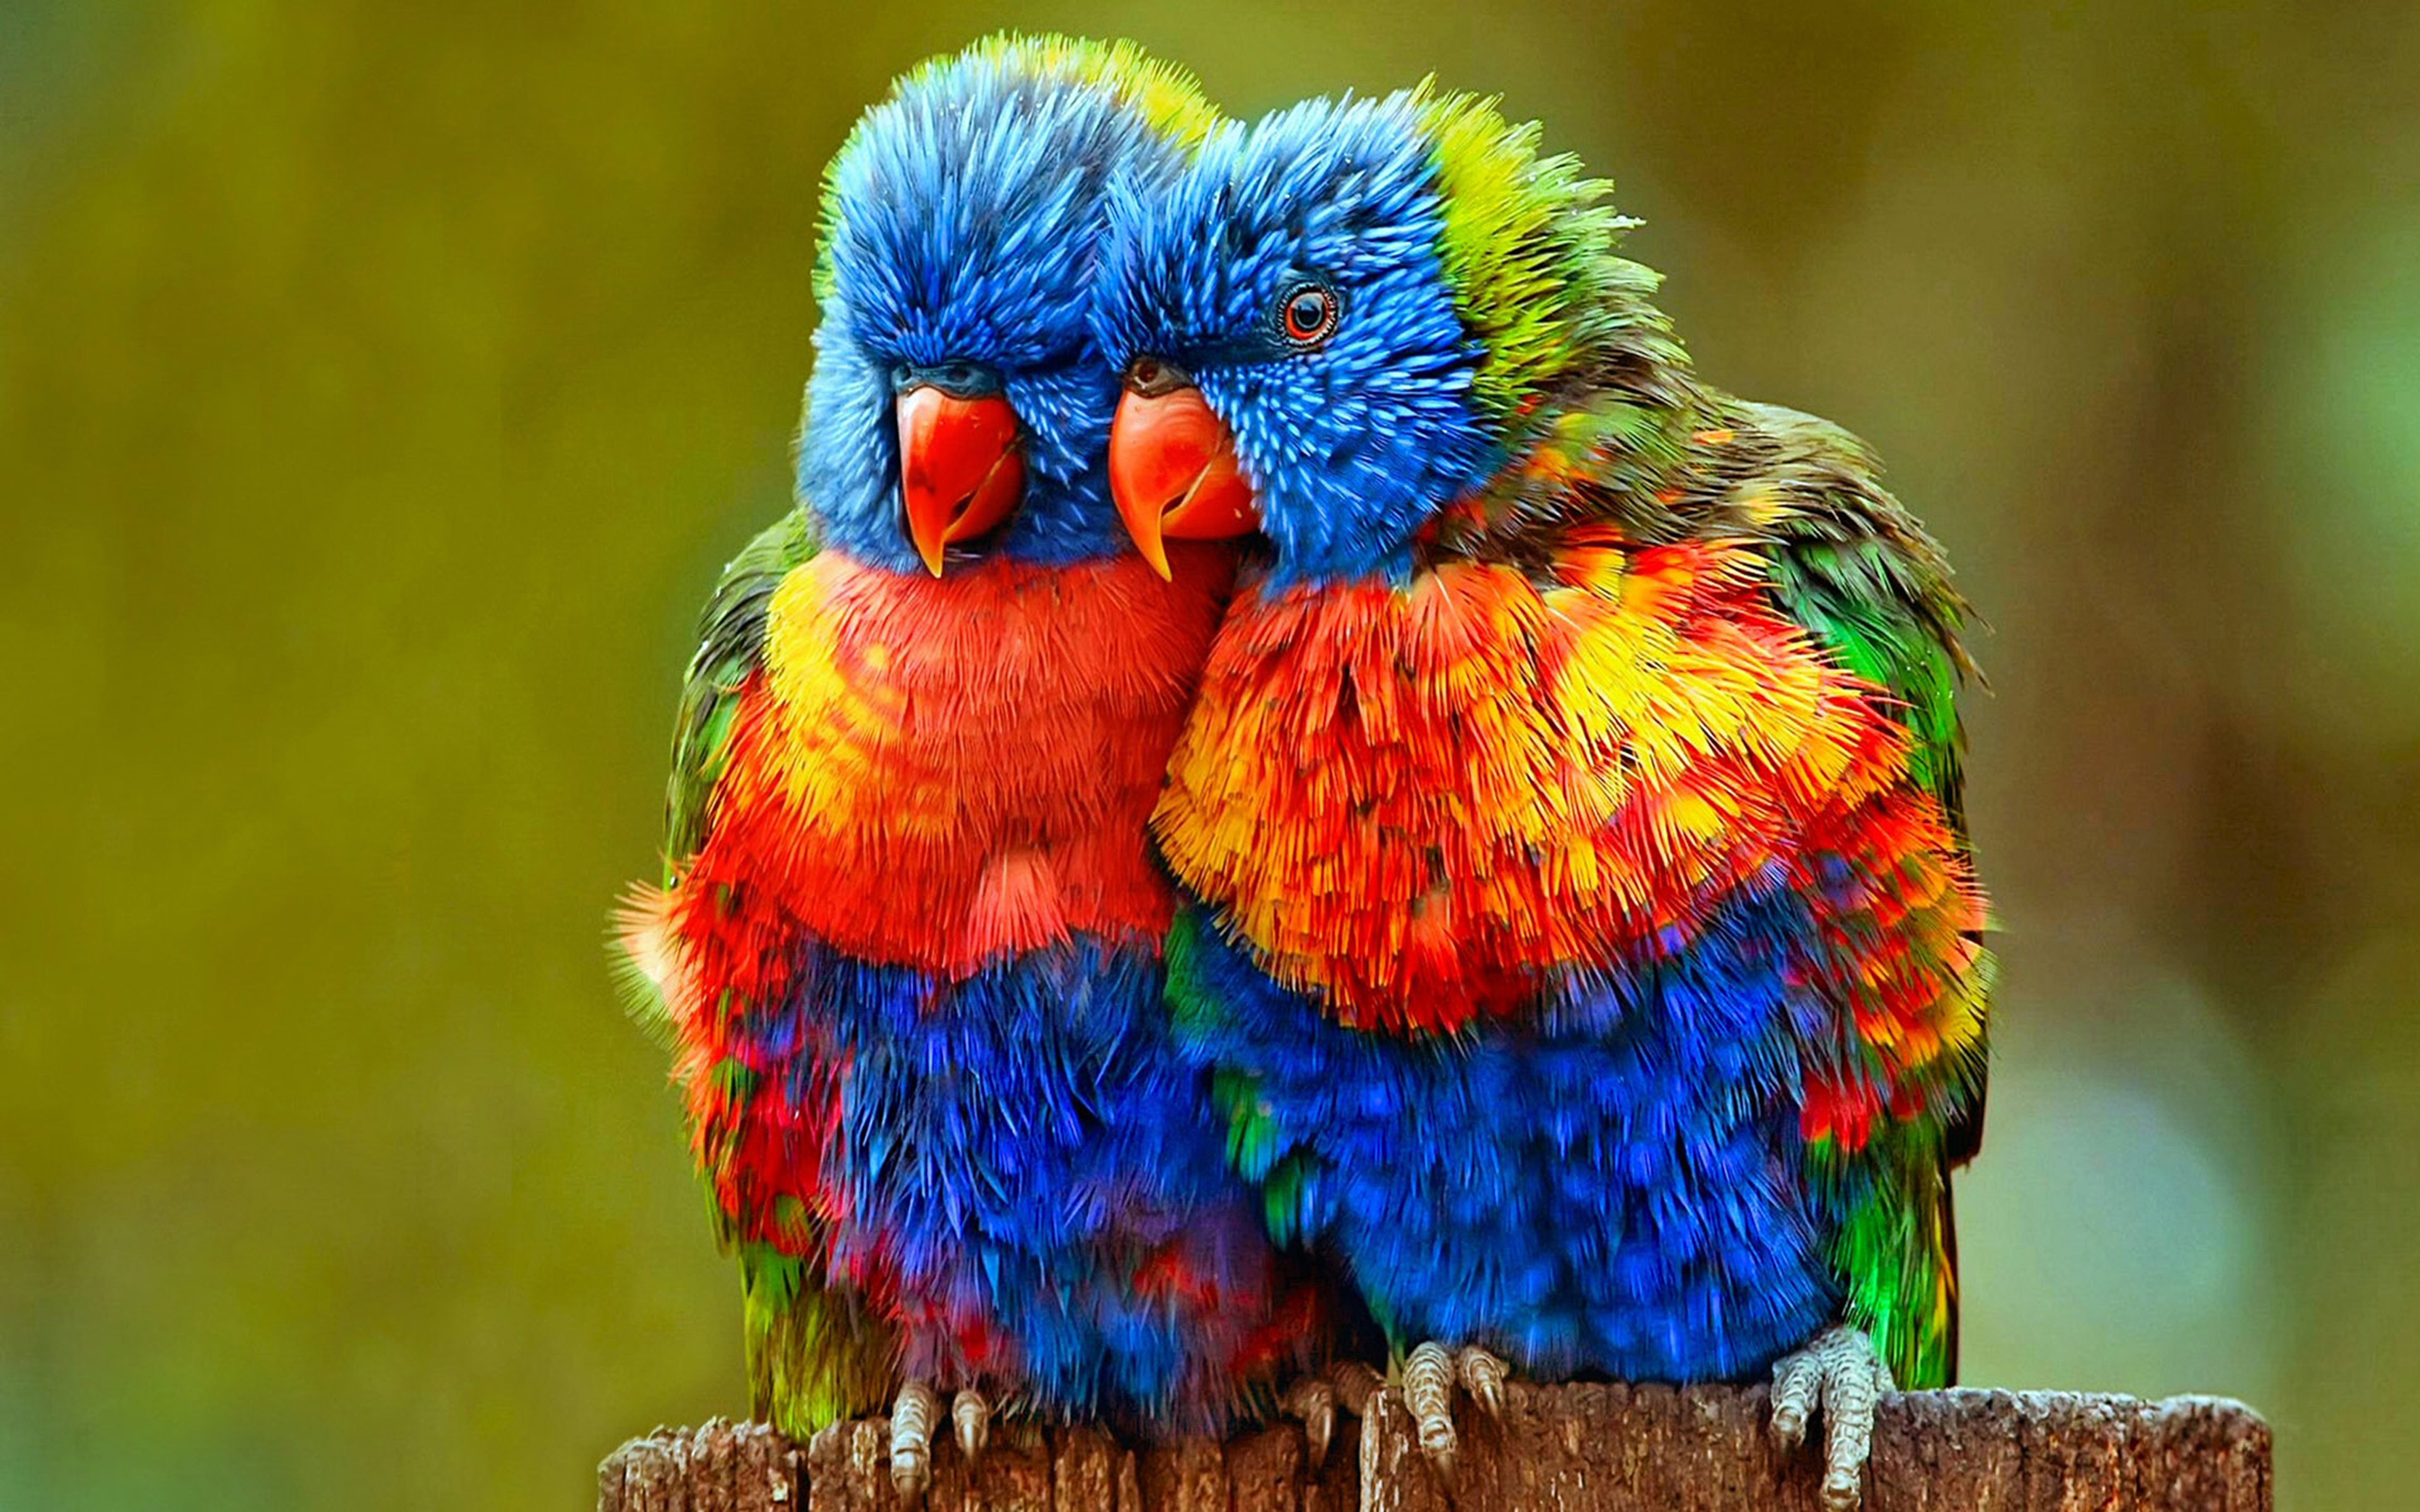 Small Colorful Parrots Wallpapers Hd : Wallpapers13.com